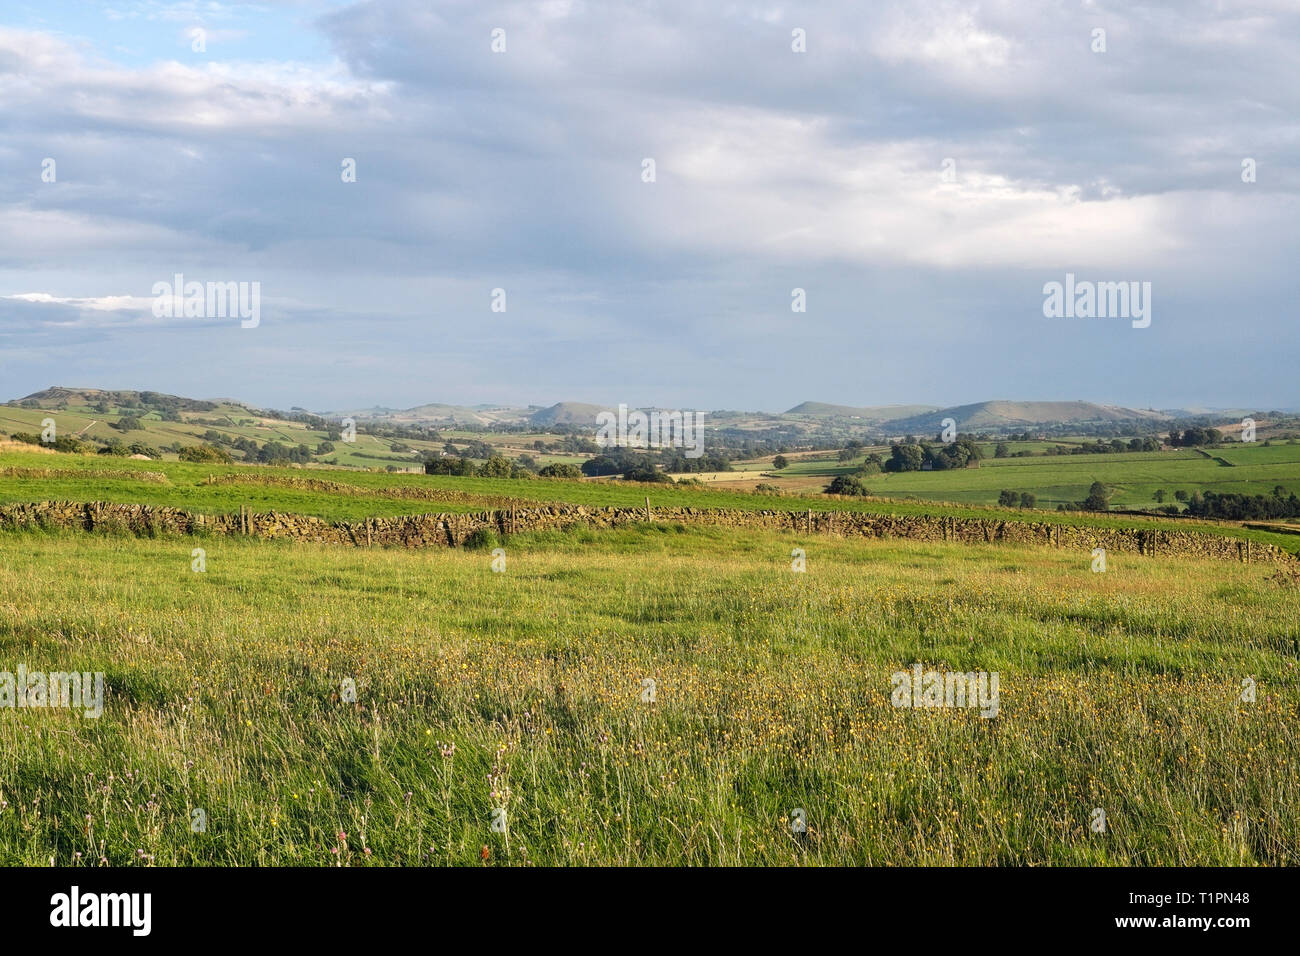 Landscape of Staffordshire Peak District National Park, England UK. English countryside farmland agricultural grazing land Stock Photo